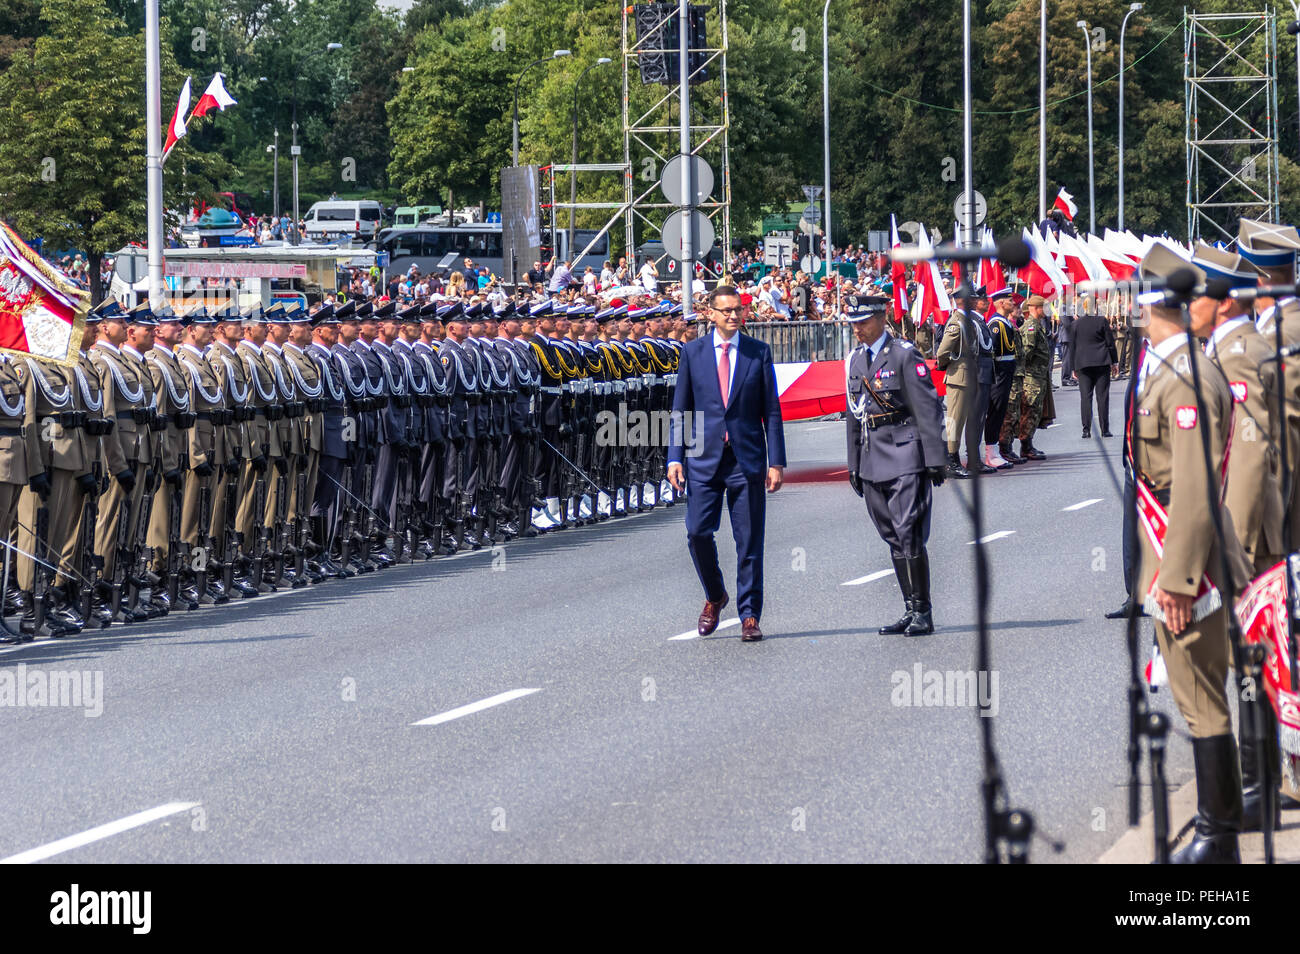 Warsaw, Poland, 15th Aug, 2018: Poland celebrates the annual Armed Forces Day and 98th anniversary of the Battle of Warsaw. Grand Independence Parade with more than 2,000 troops, hundreds re-enactors, different types of military vehicles, more or less 100 planes and helicopters and 100,000 audience took place in the Poland’s capital. Small units from the US, the UK, Croatia and Romania marched together with Polish soldiers. President Andrzej Duda of Poland, Mateusz Morawiecki (PM) and Mariusz Blaszczak (MoD) took part in the event. Credit: dario photography/Alamy Live News. Stock Photo